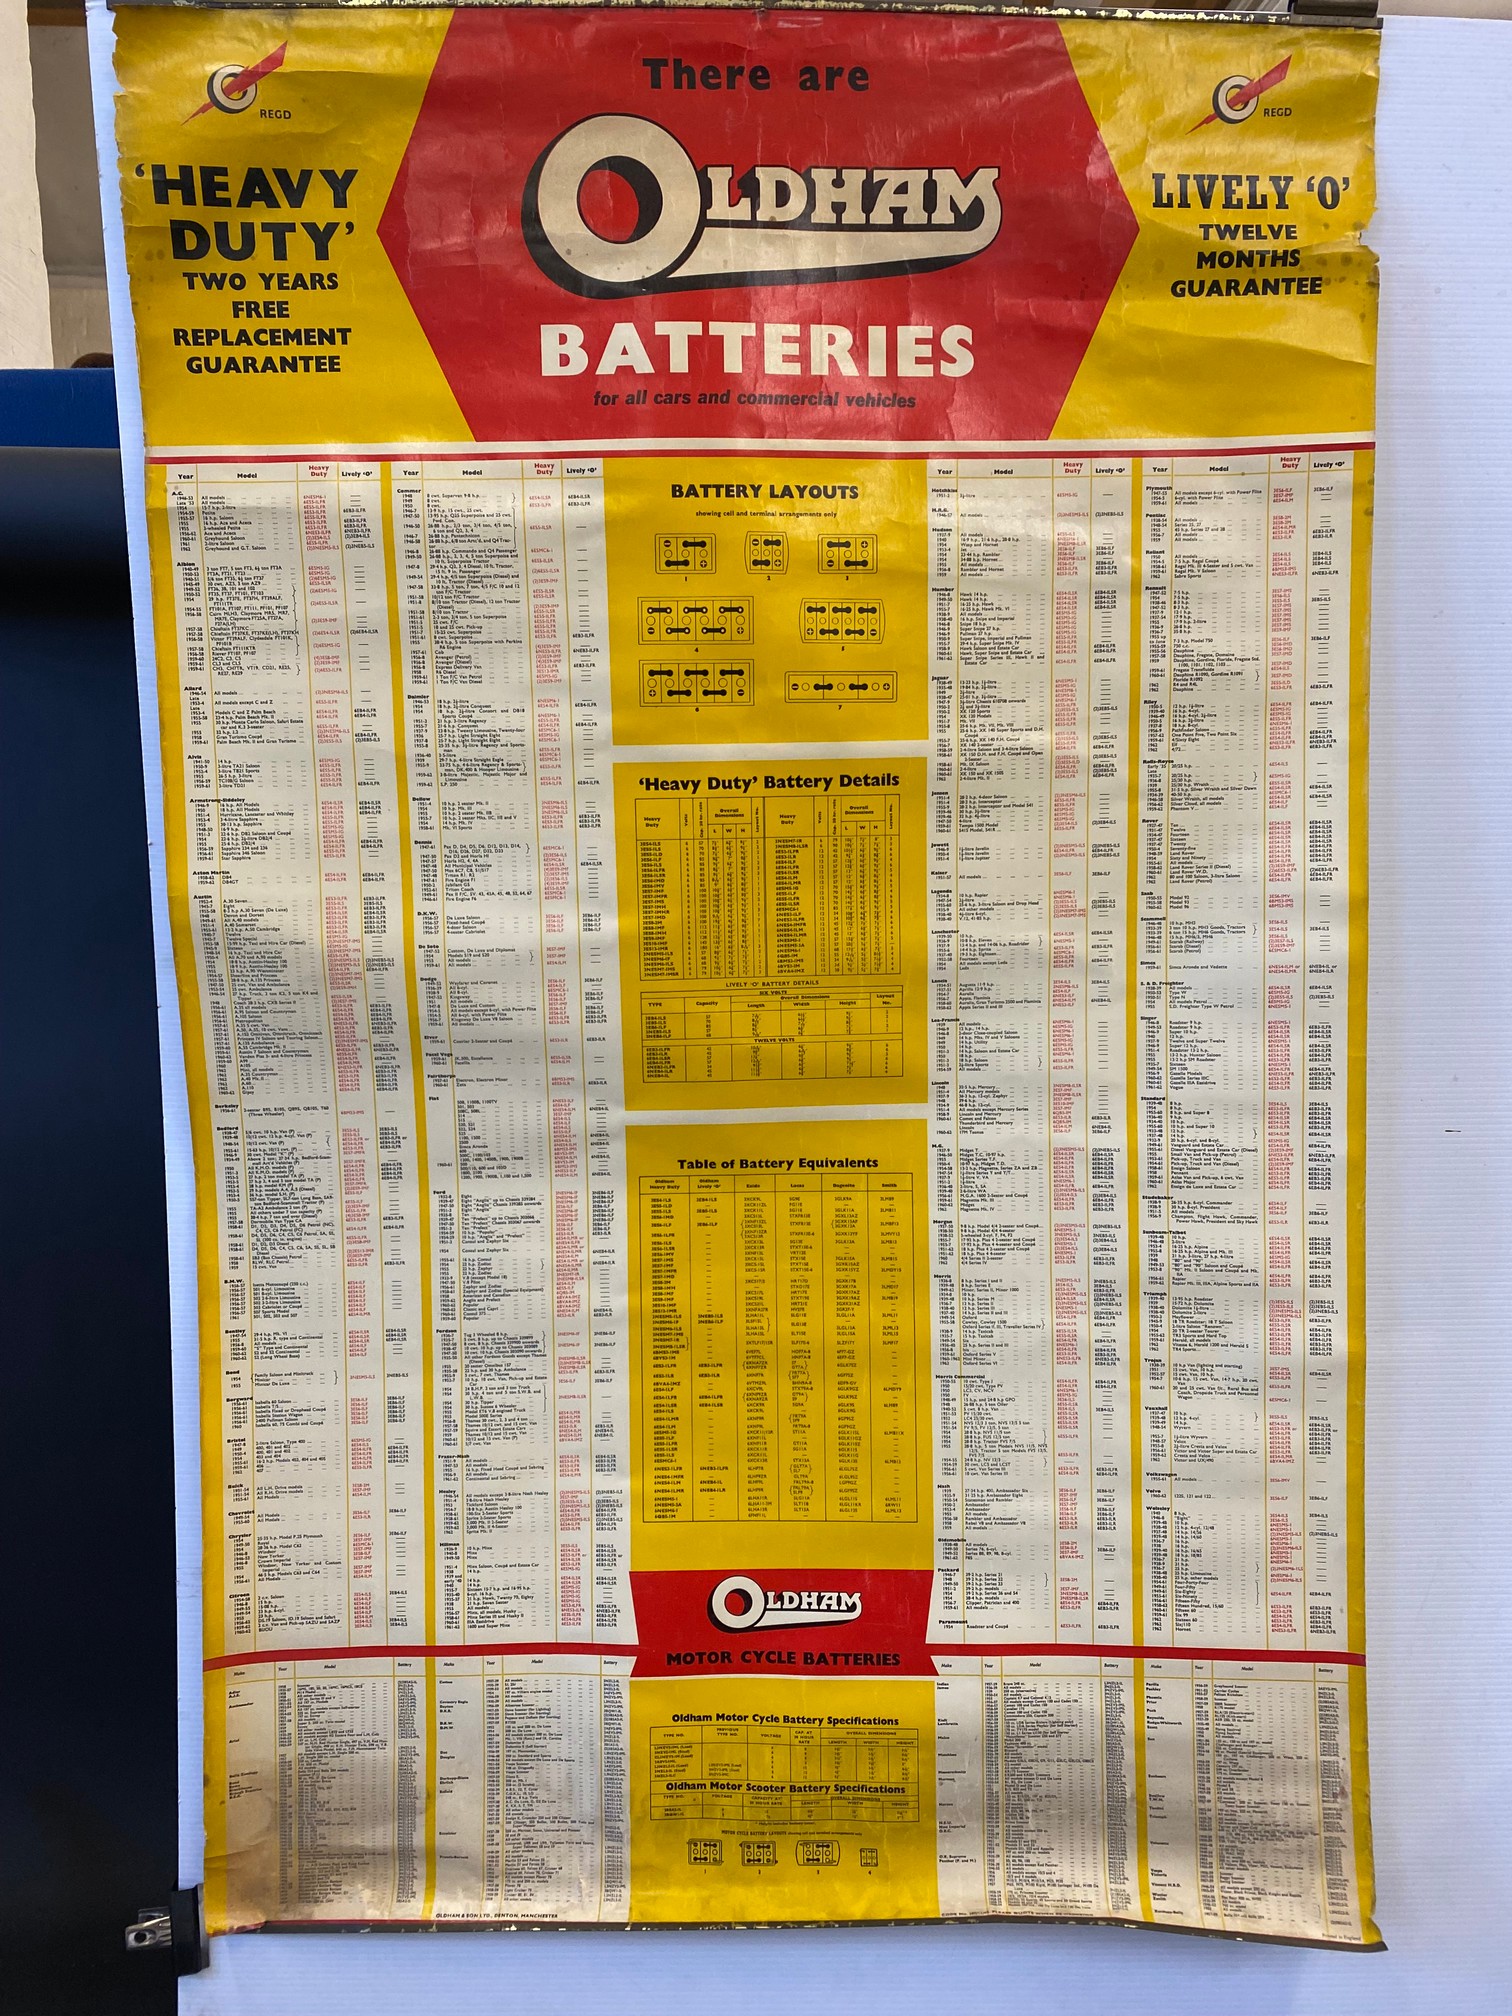 An Oldham Batteries rolled up chart of good, bright colour, 28 x 44".